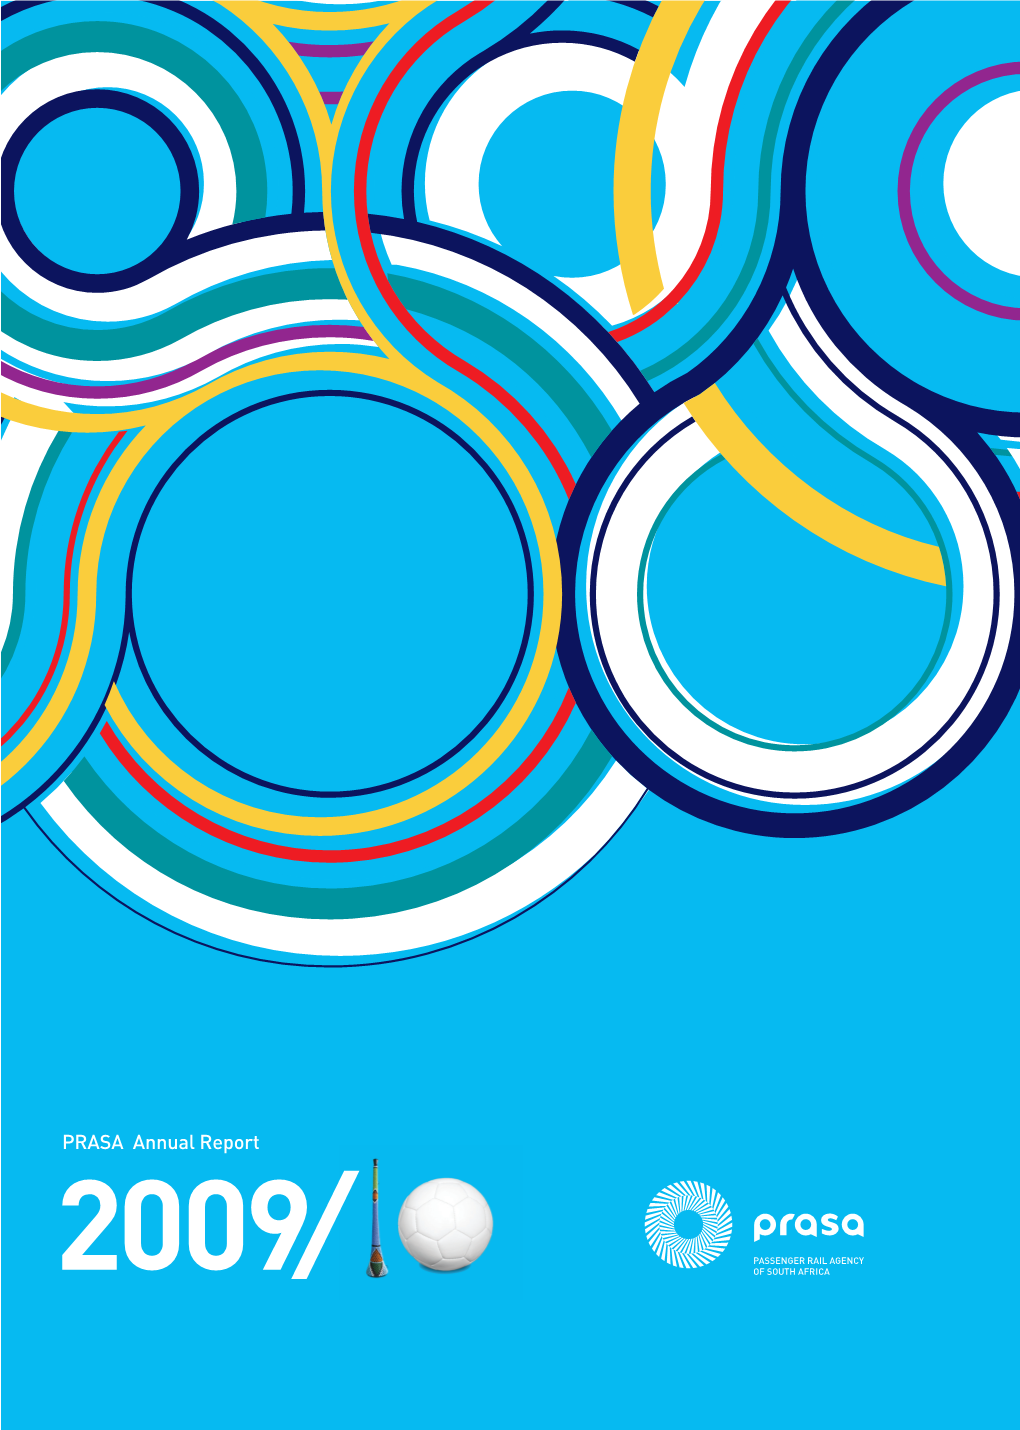 Annual Report for the Period of 1 April 2009 to 31 March 2010